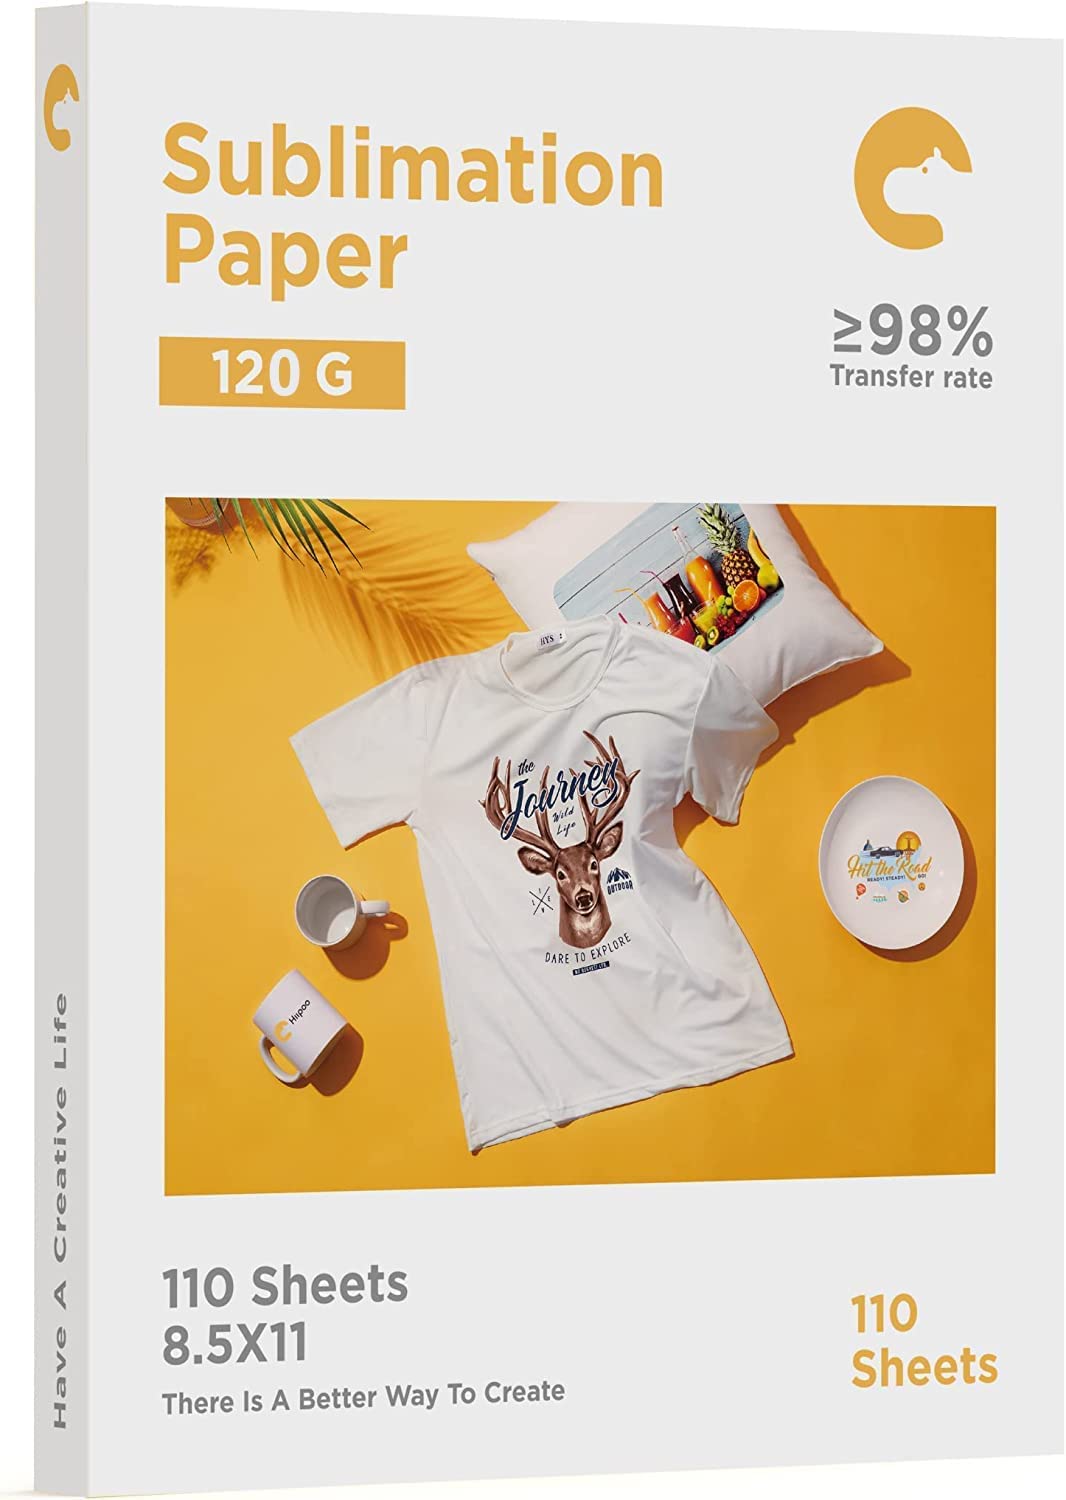 What is sublimation paper?